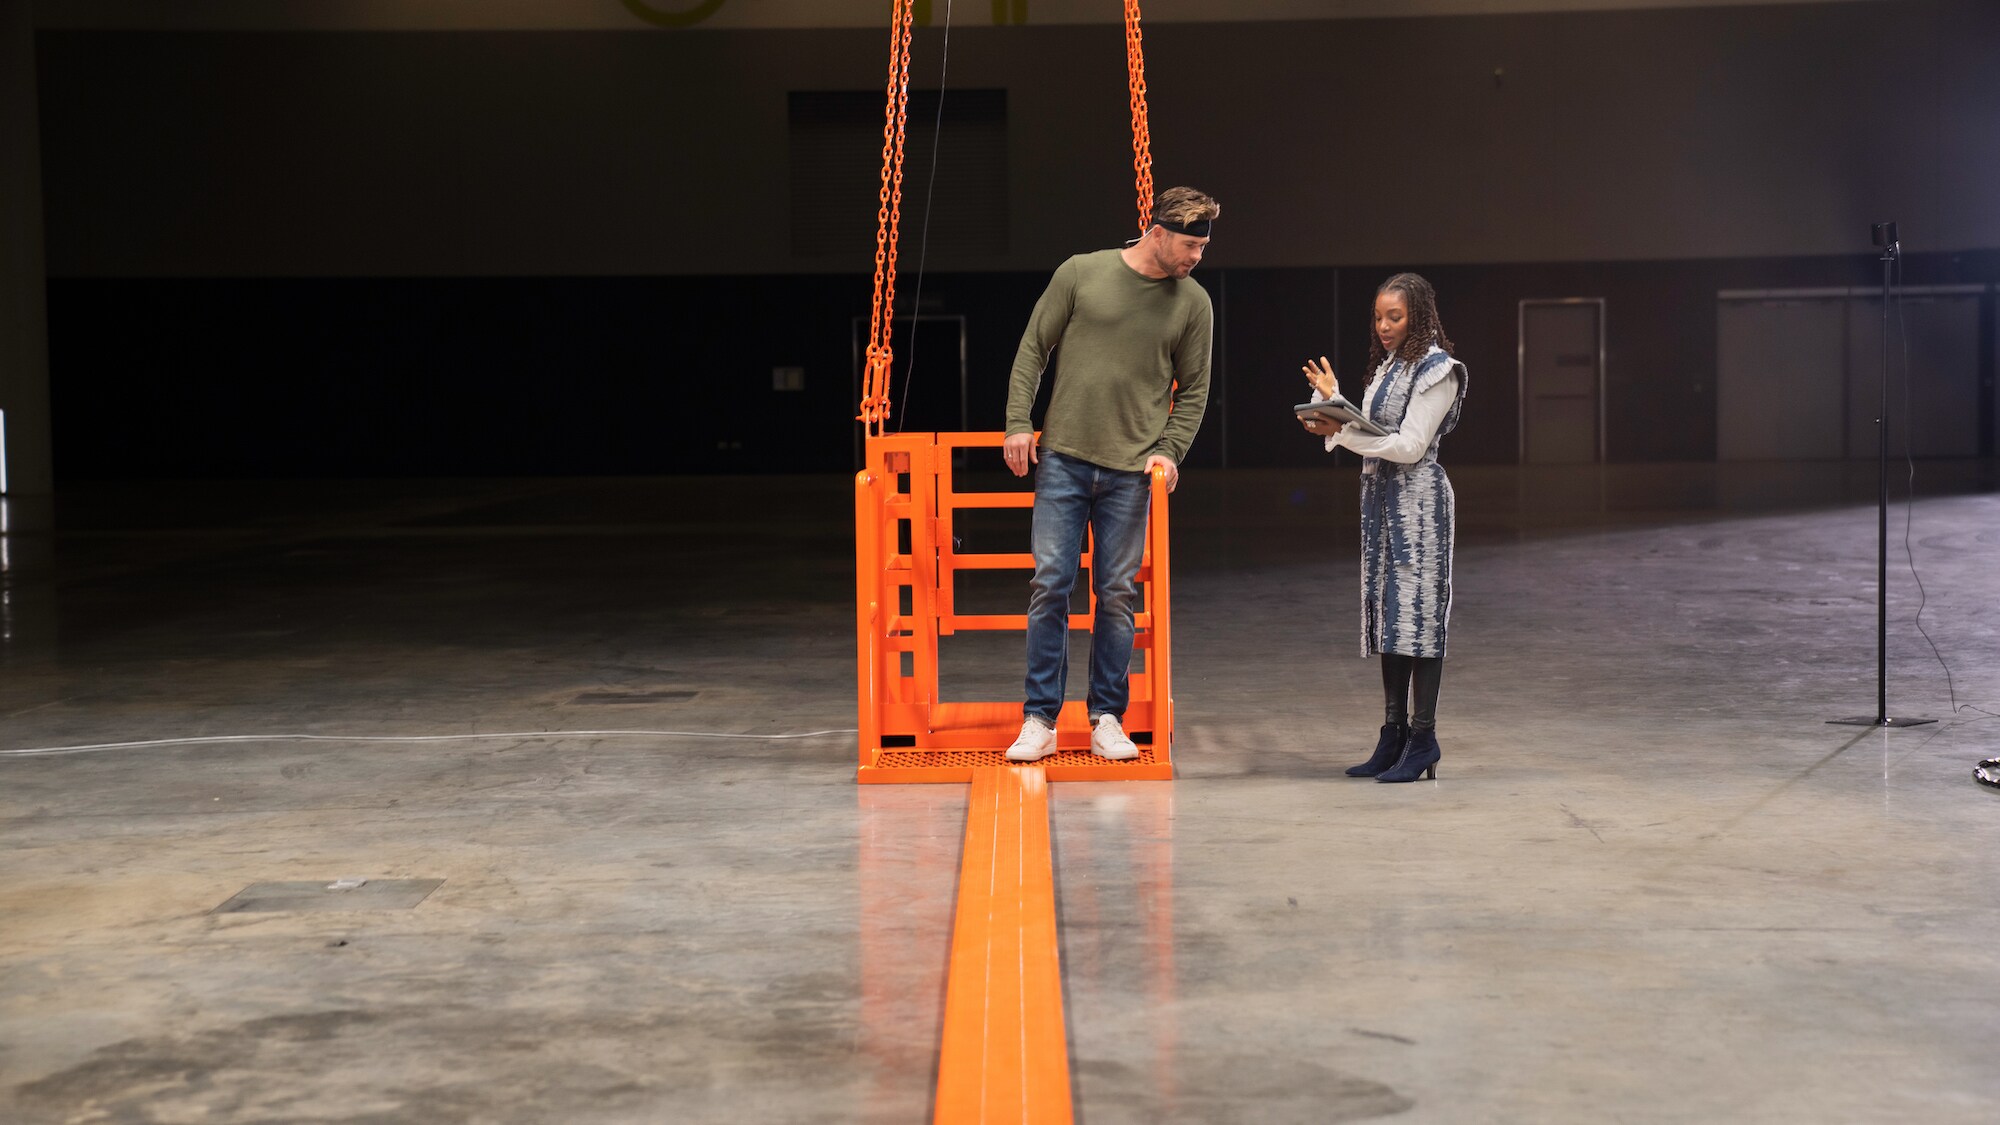 Chris Hemsworth prepares to practice his crane walk in VR with the support of Dr. Modupe Akinola. (National Geographic for Disney+/Craig Parry)